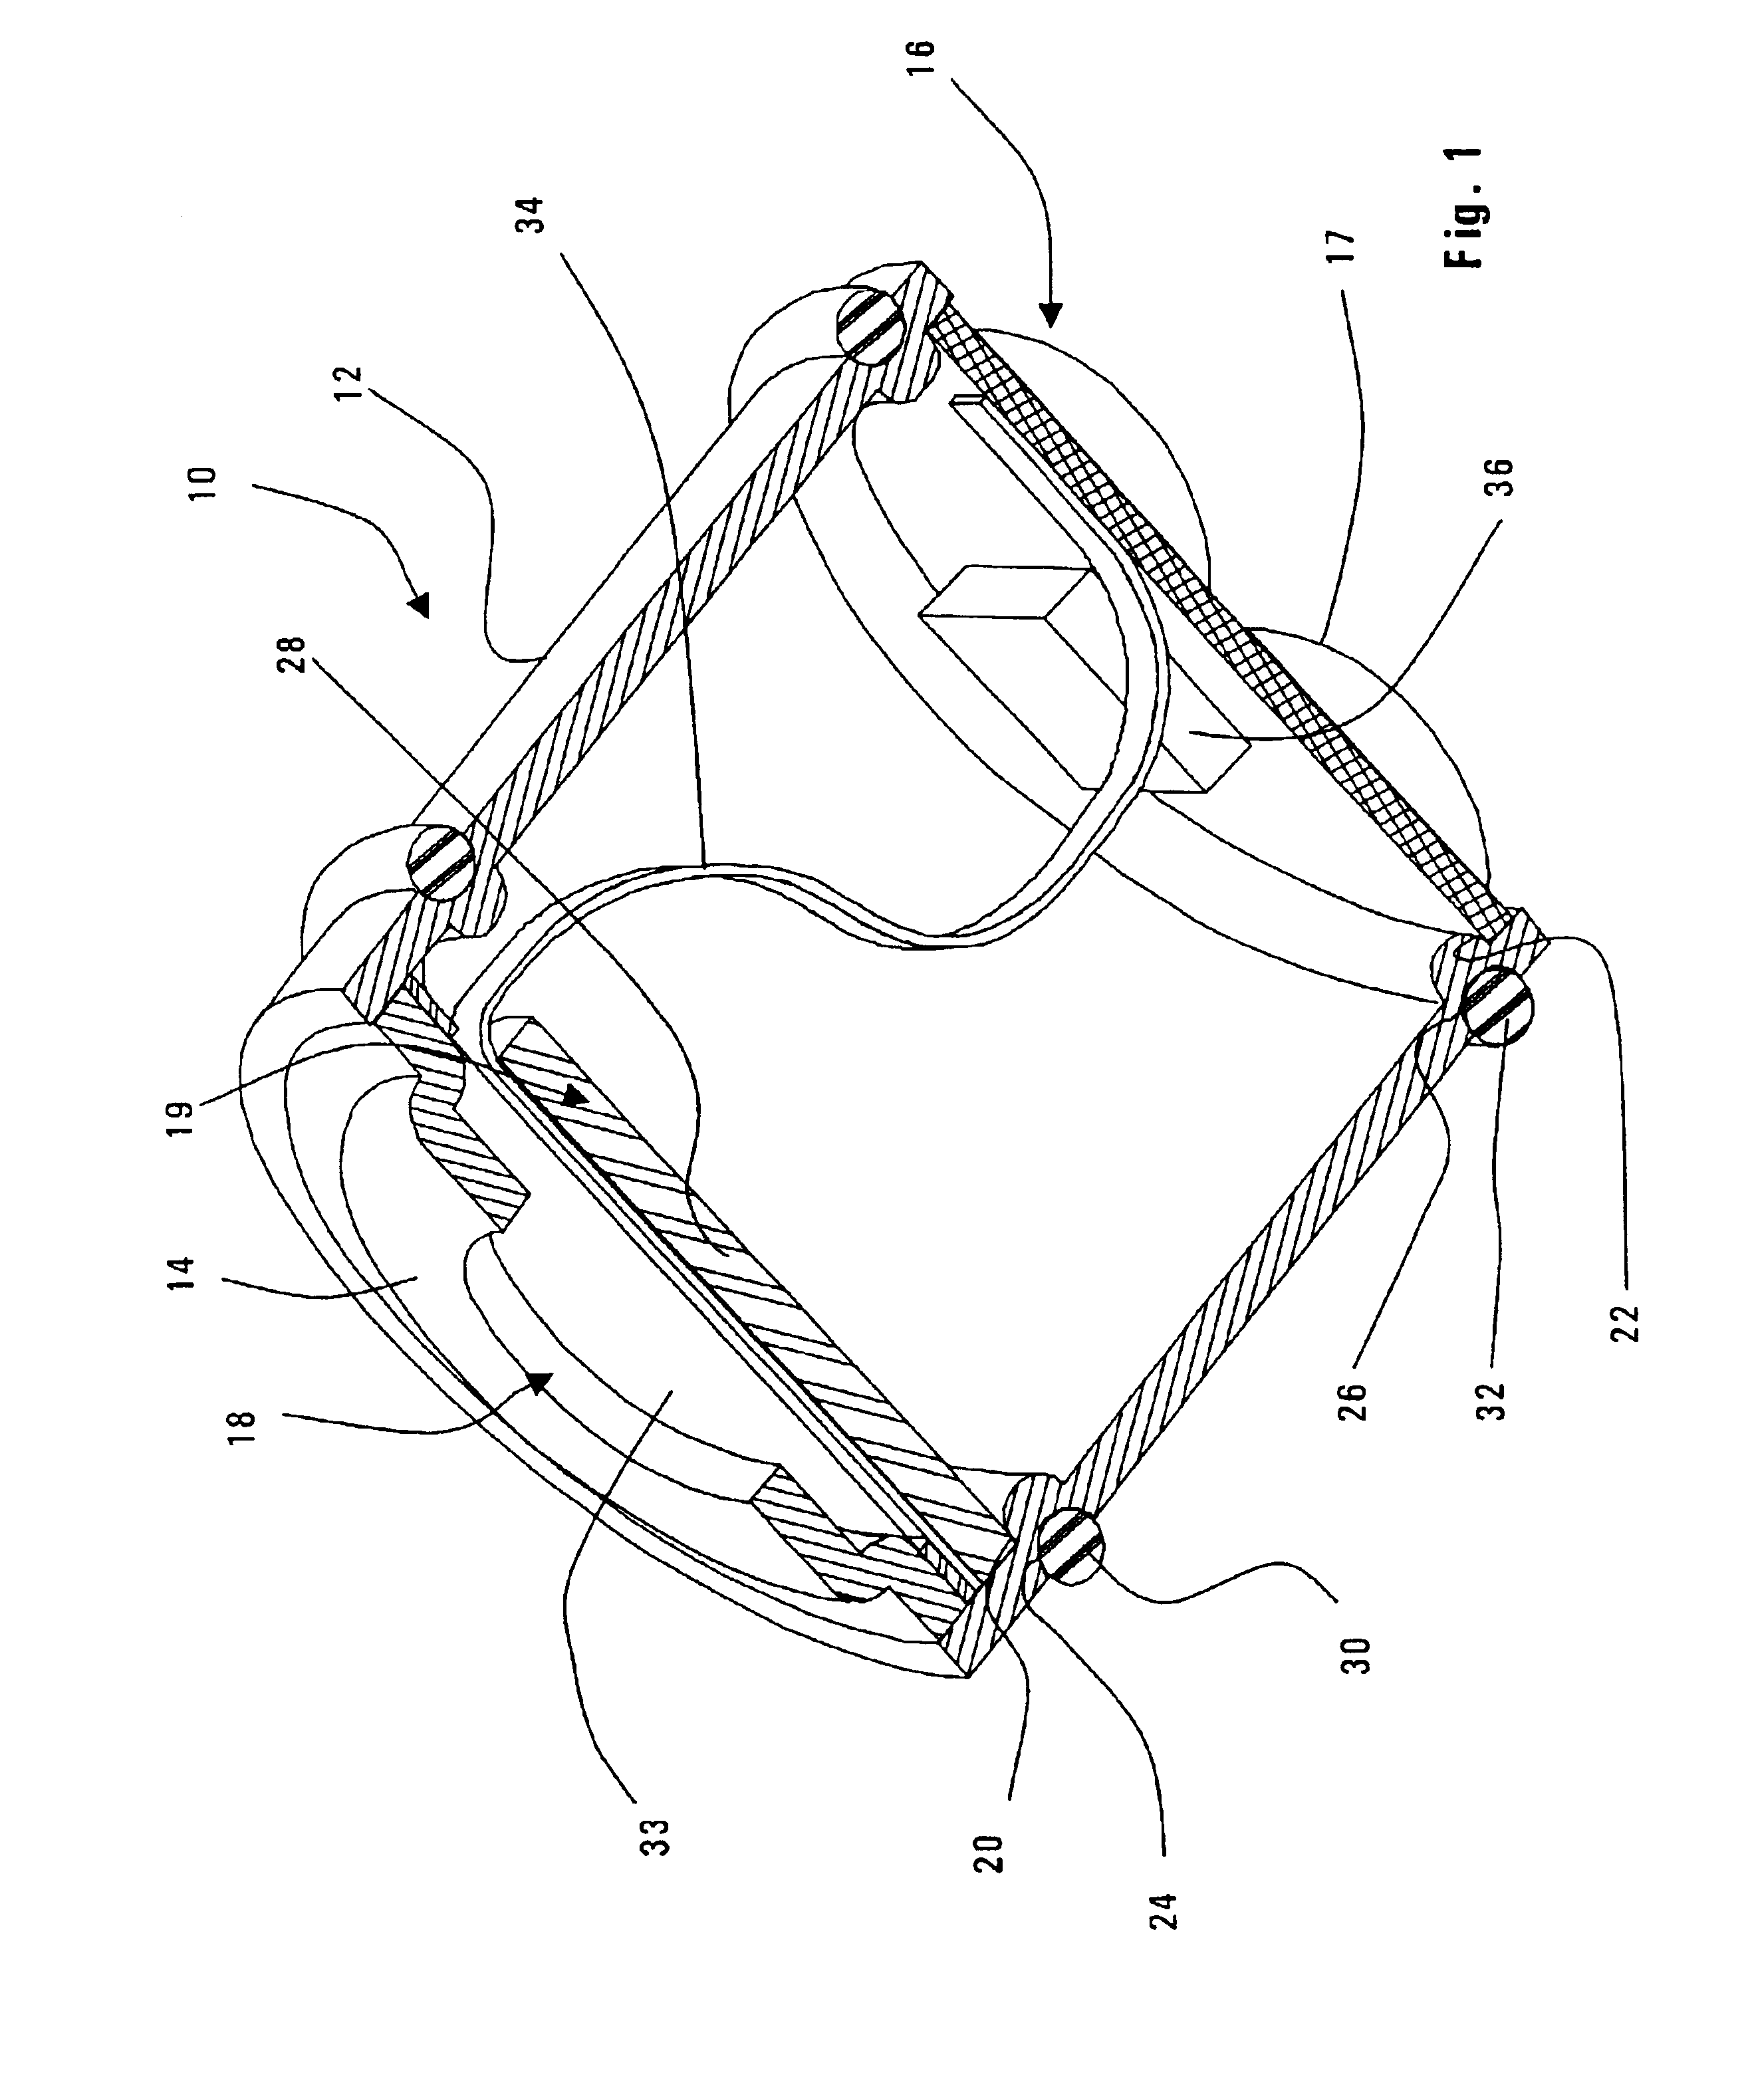 Microphone for a listening device having a reduced humidity coefficient